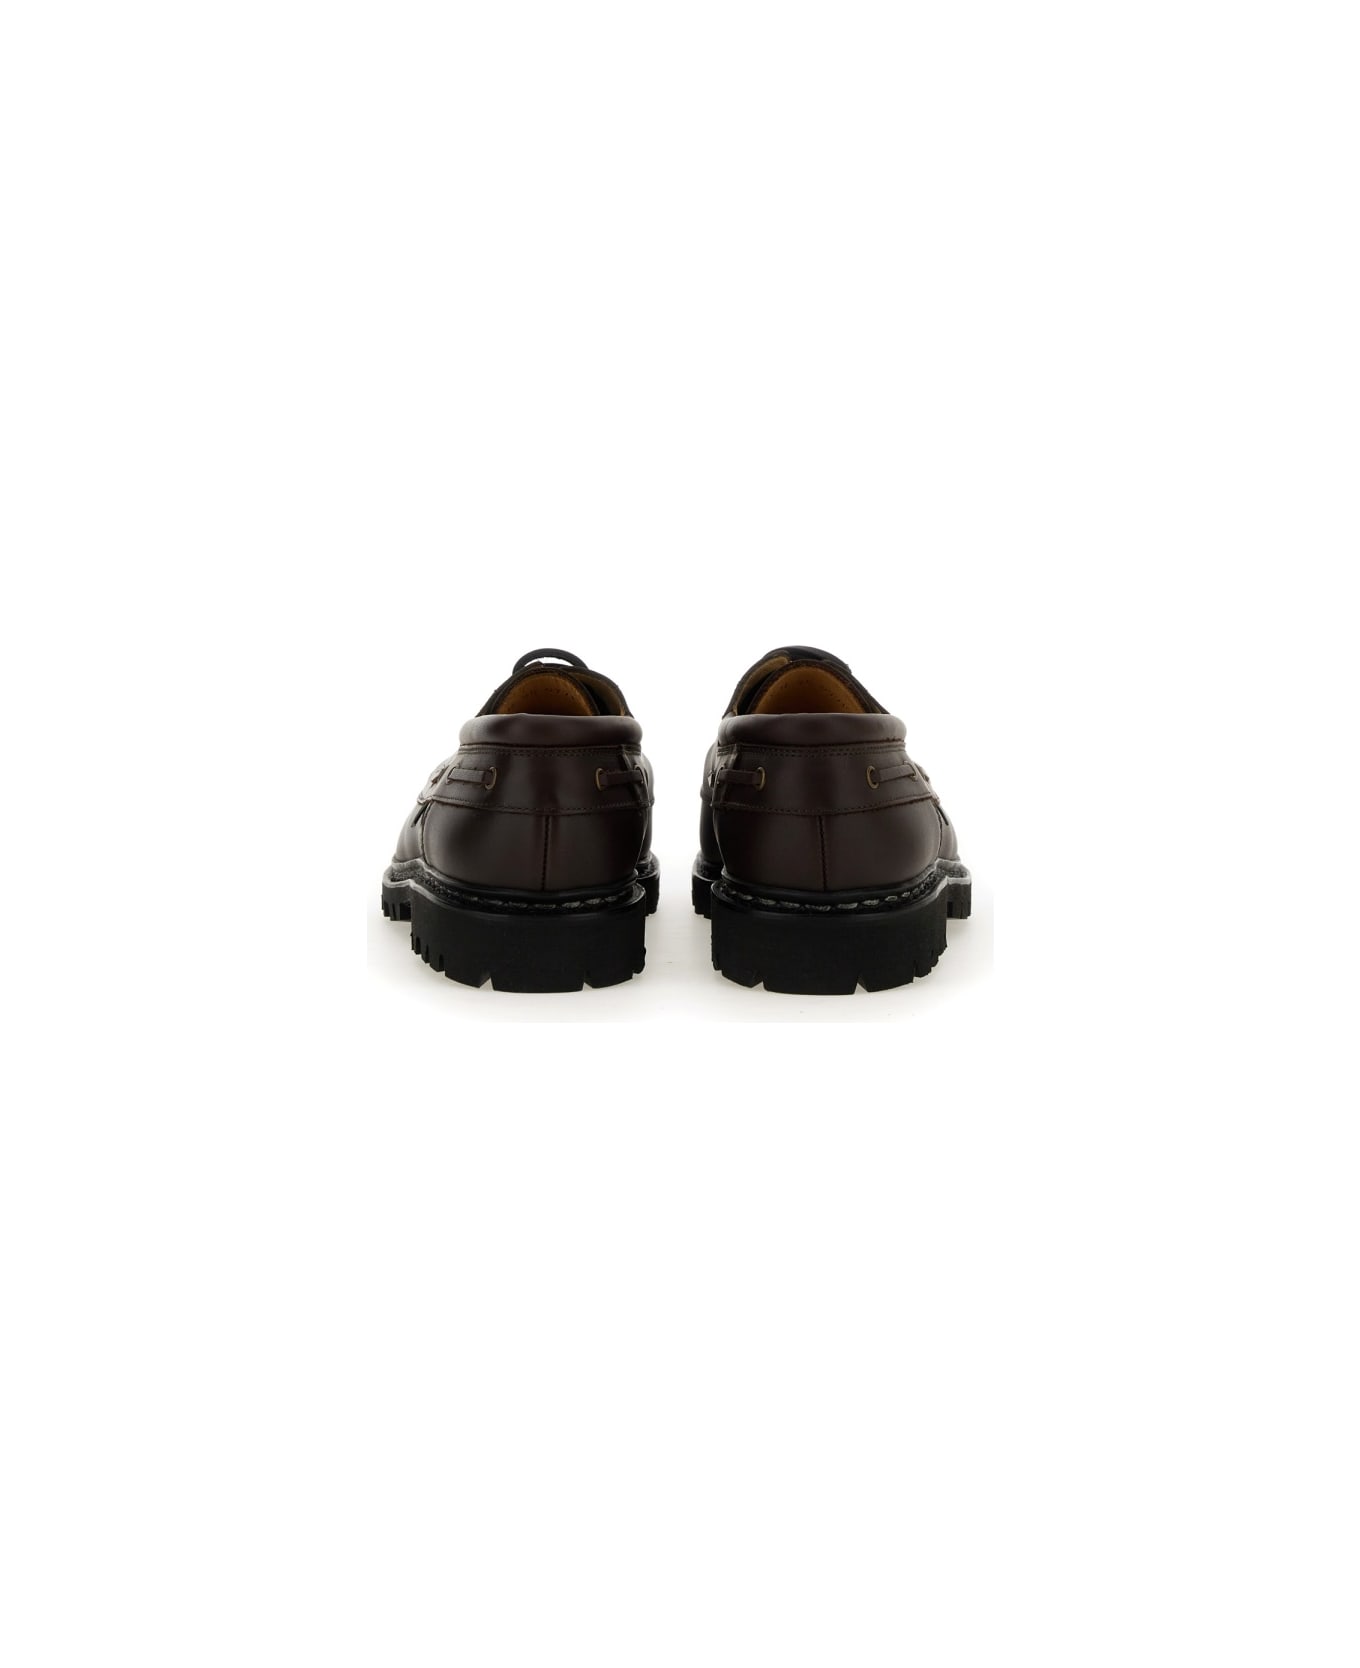 Paraboot Chimey Loafer - BROWN